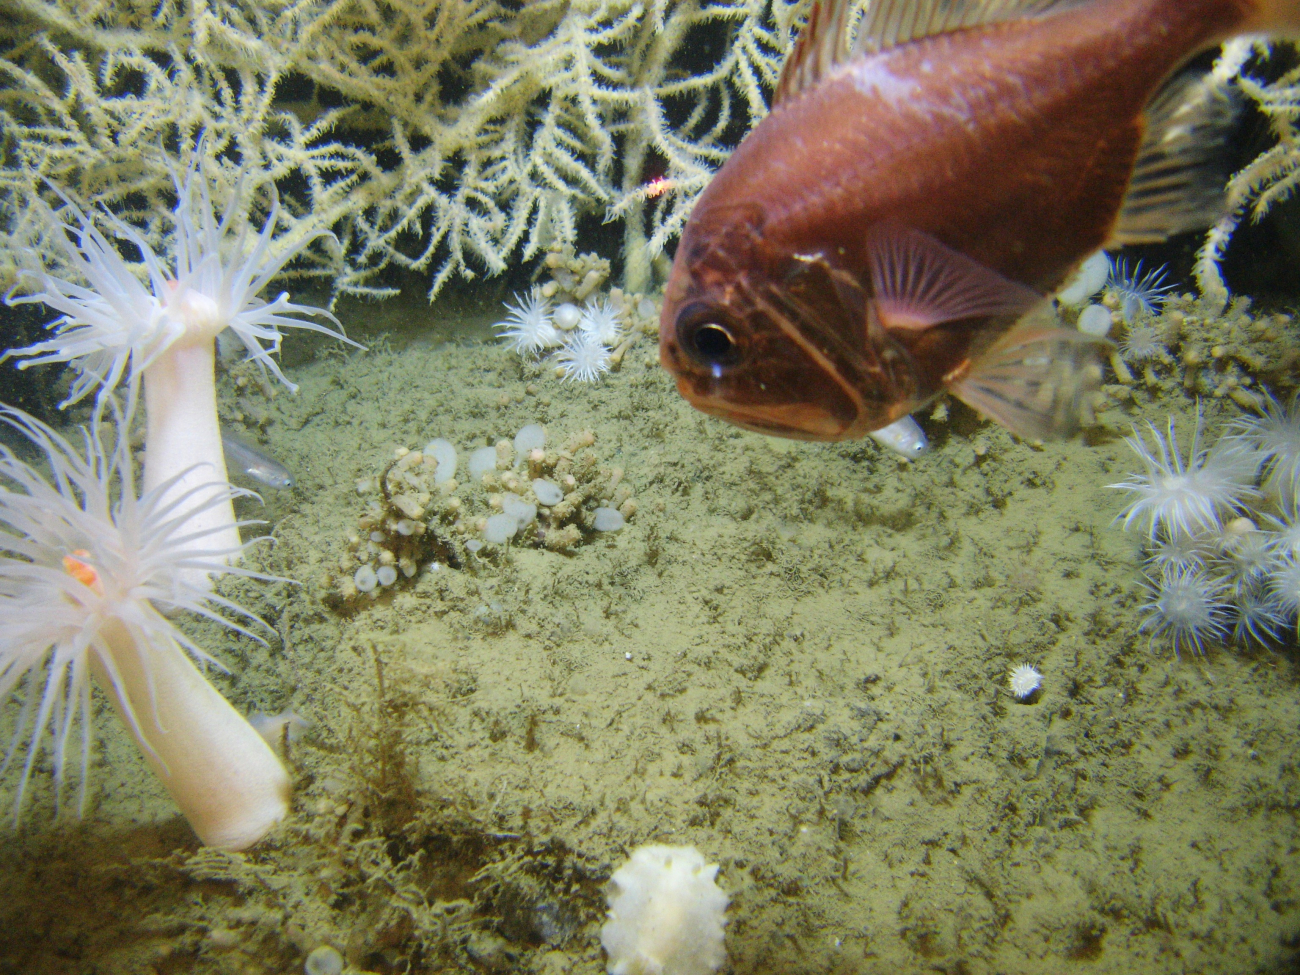 An Atlantic roughy, Hoplostethus occidentalis, swims at the base of a largeLeiopathes glabberima colony at 300 meters depth in the NorthwesternGulf of Mexico